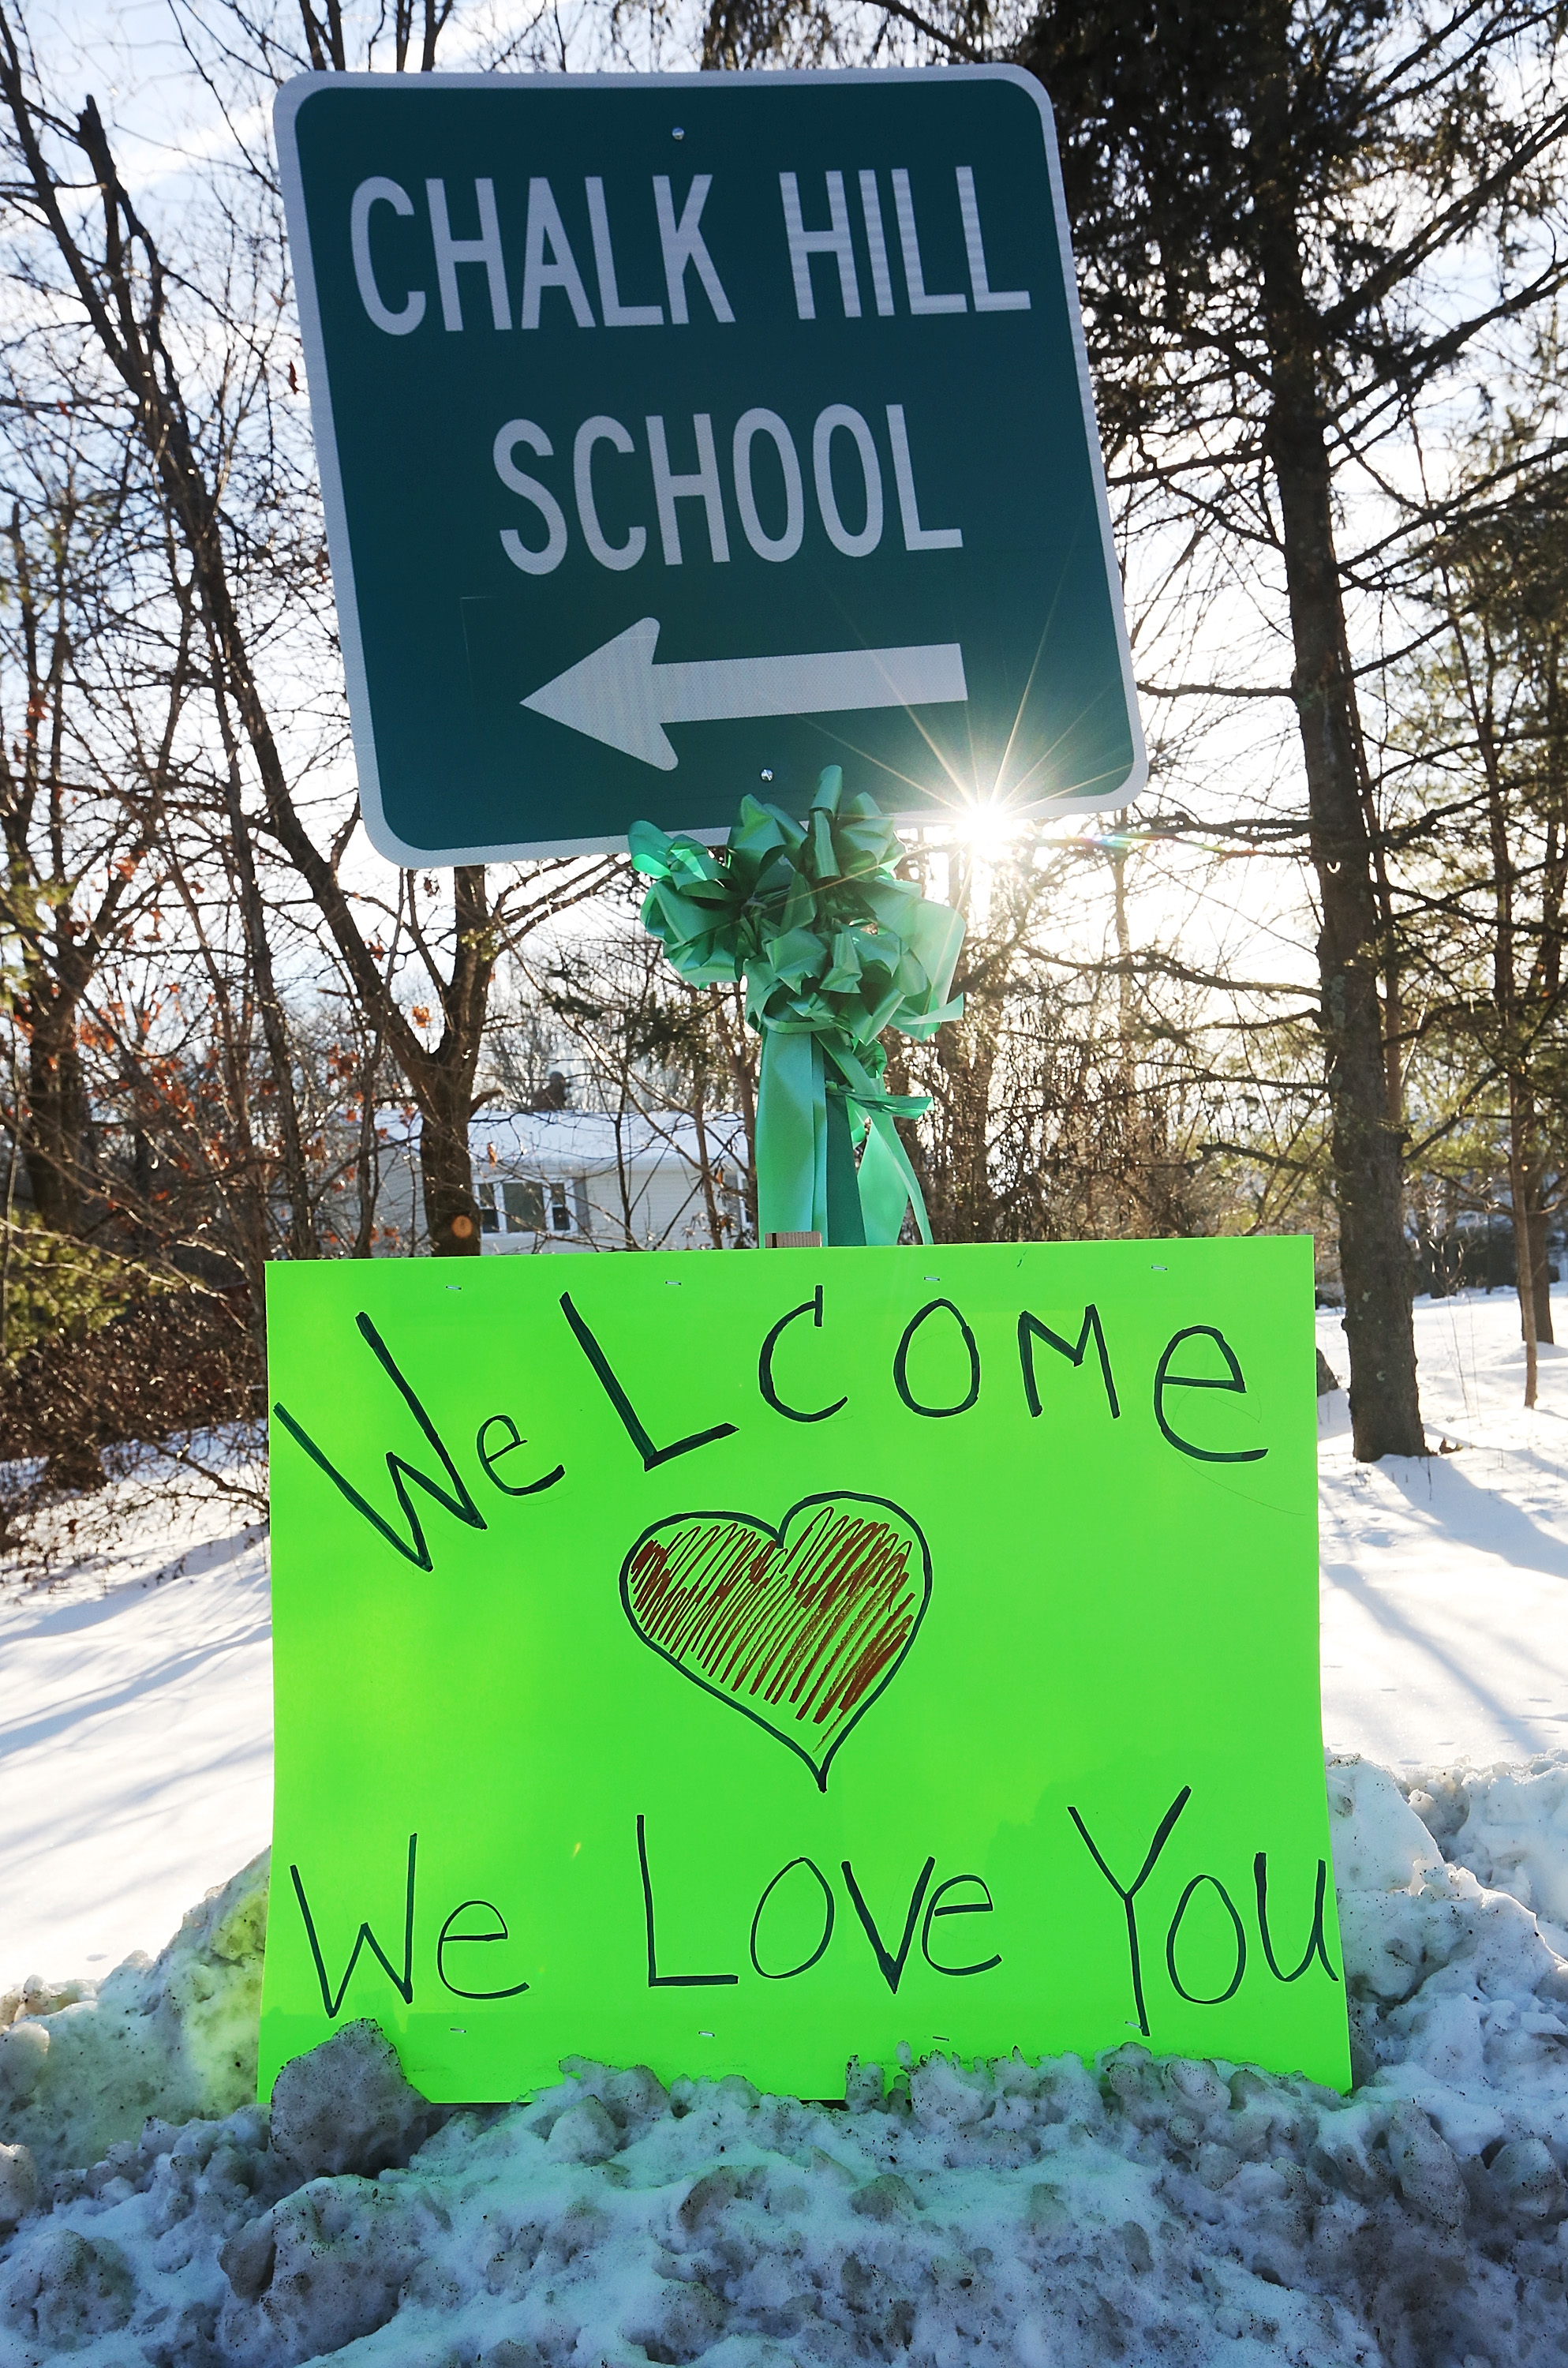 A sign reads 'Welcome We Love You' beneath a sign pointing to the location of Chalk Hill School, which has been refurbished and renamed Sandy Hook Elementary School on January 3, 2013 in Monroe, Connecticut. (Photo by Mario Tama/Getty Images) 